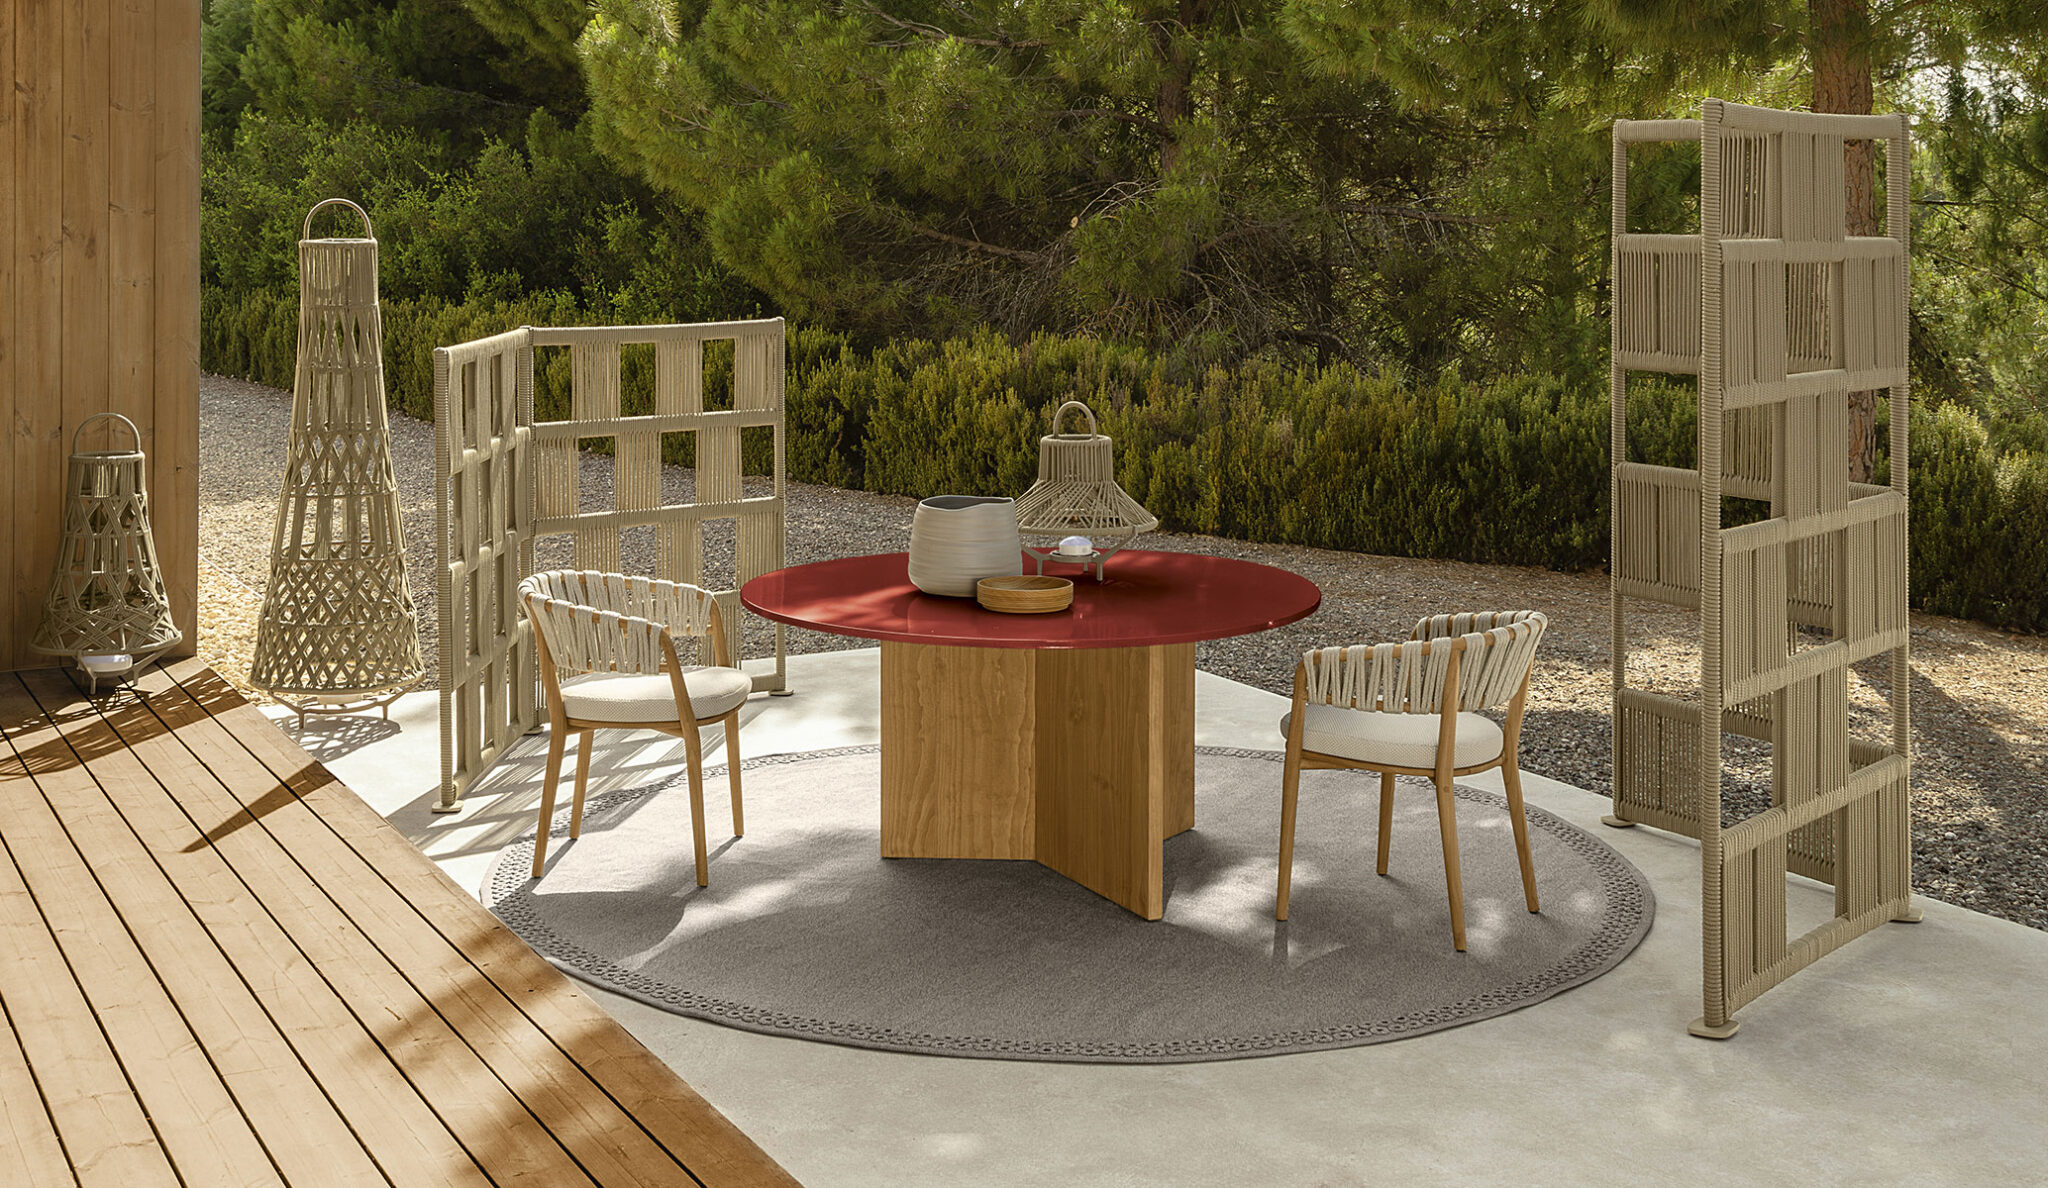 Talenti Frame dining chair. And Venice dining table Designed by renowned creators Ludovica and Roberto Palomba, Talenti